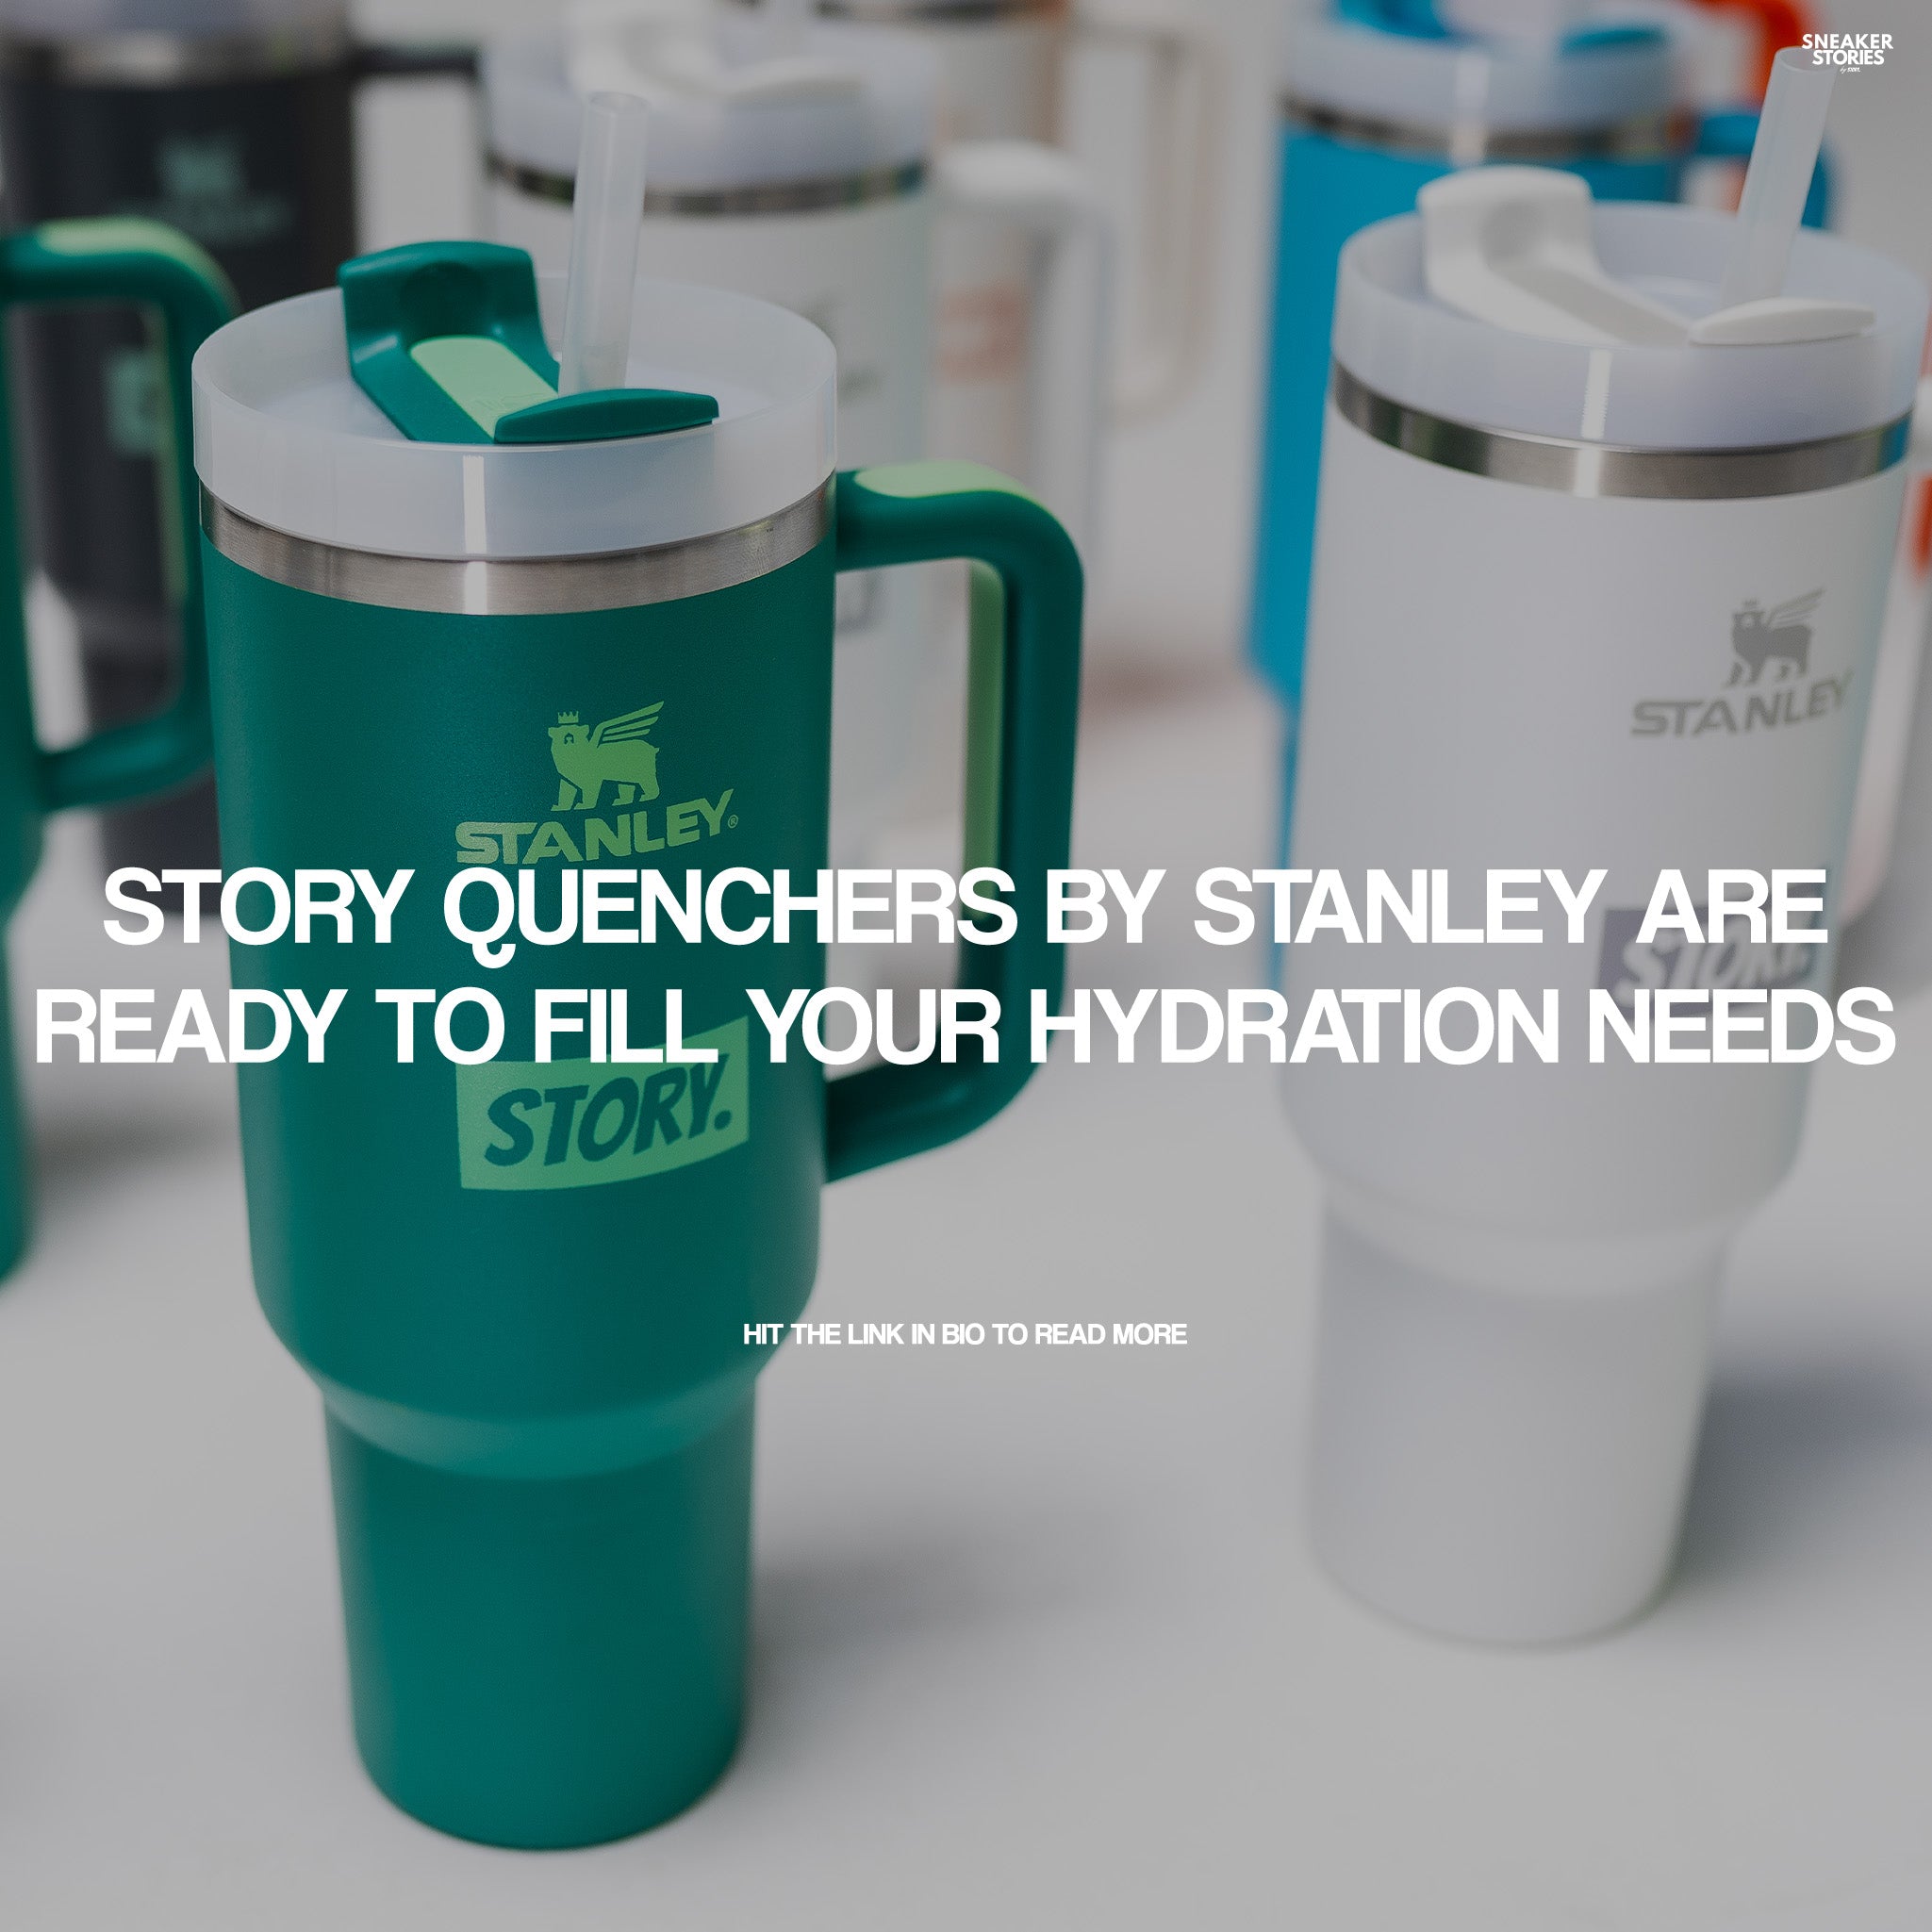 Story Quenchers by Stanley are ready to fill your hydration needs